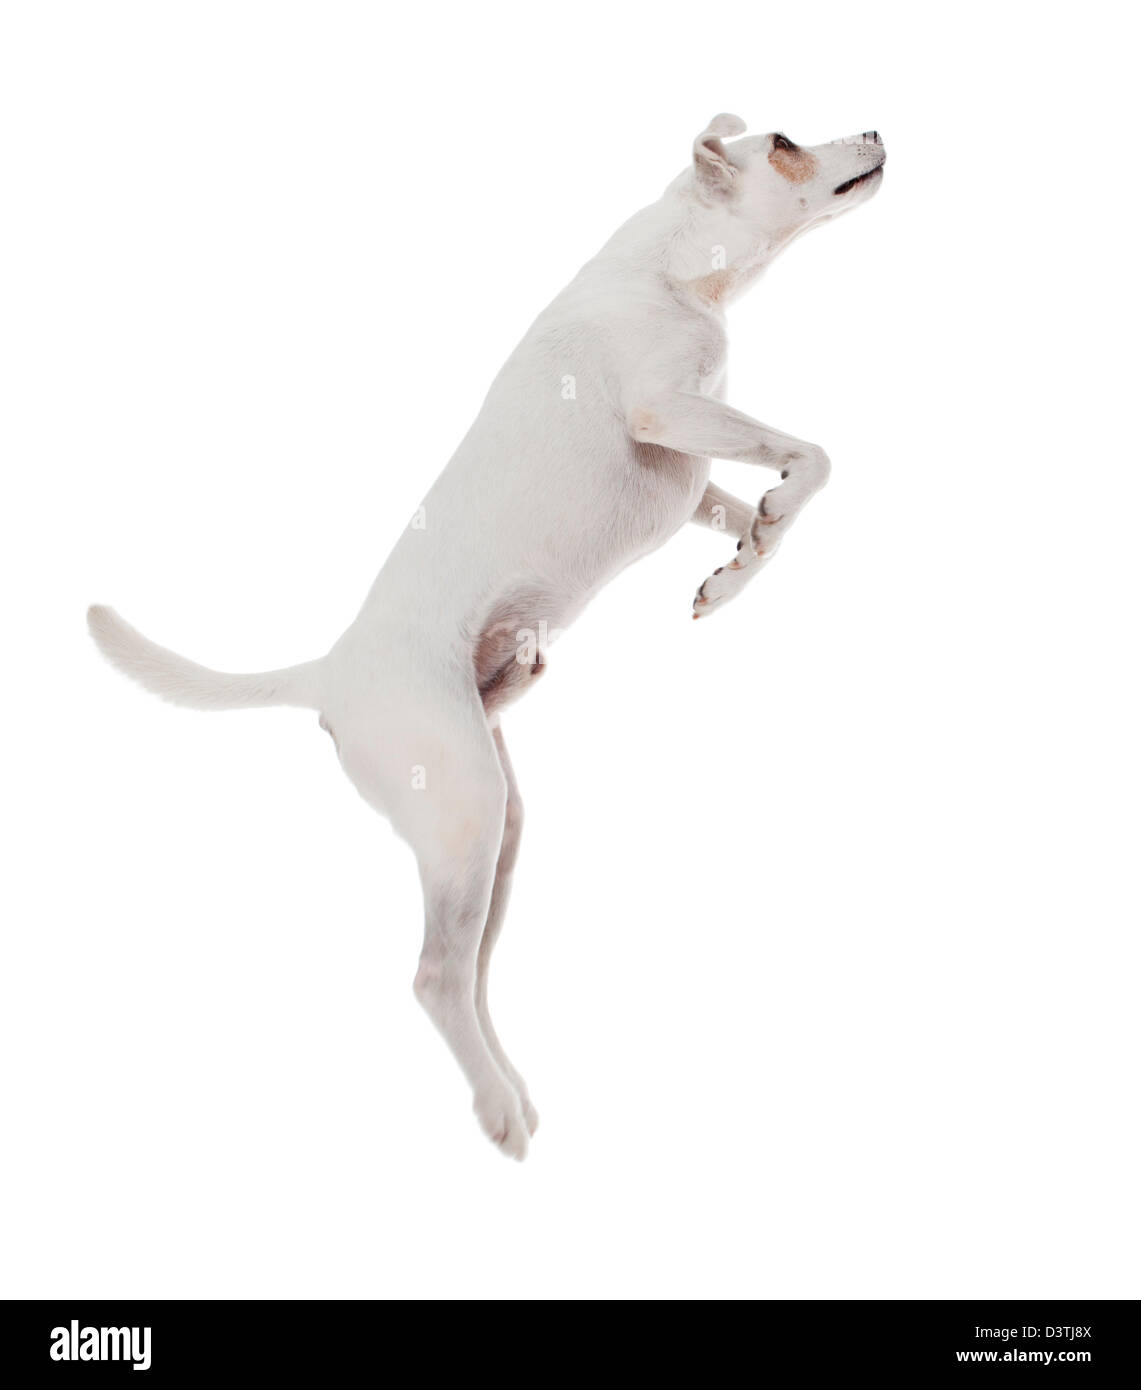 Jumping Jack Russell Terrier Banque D'Images